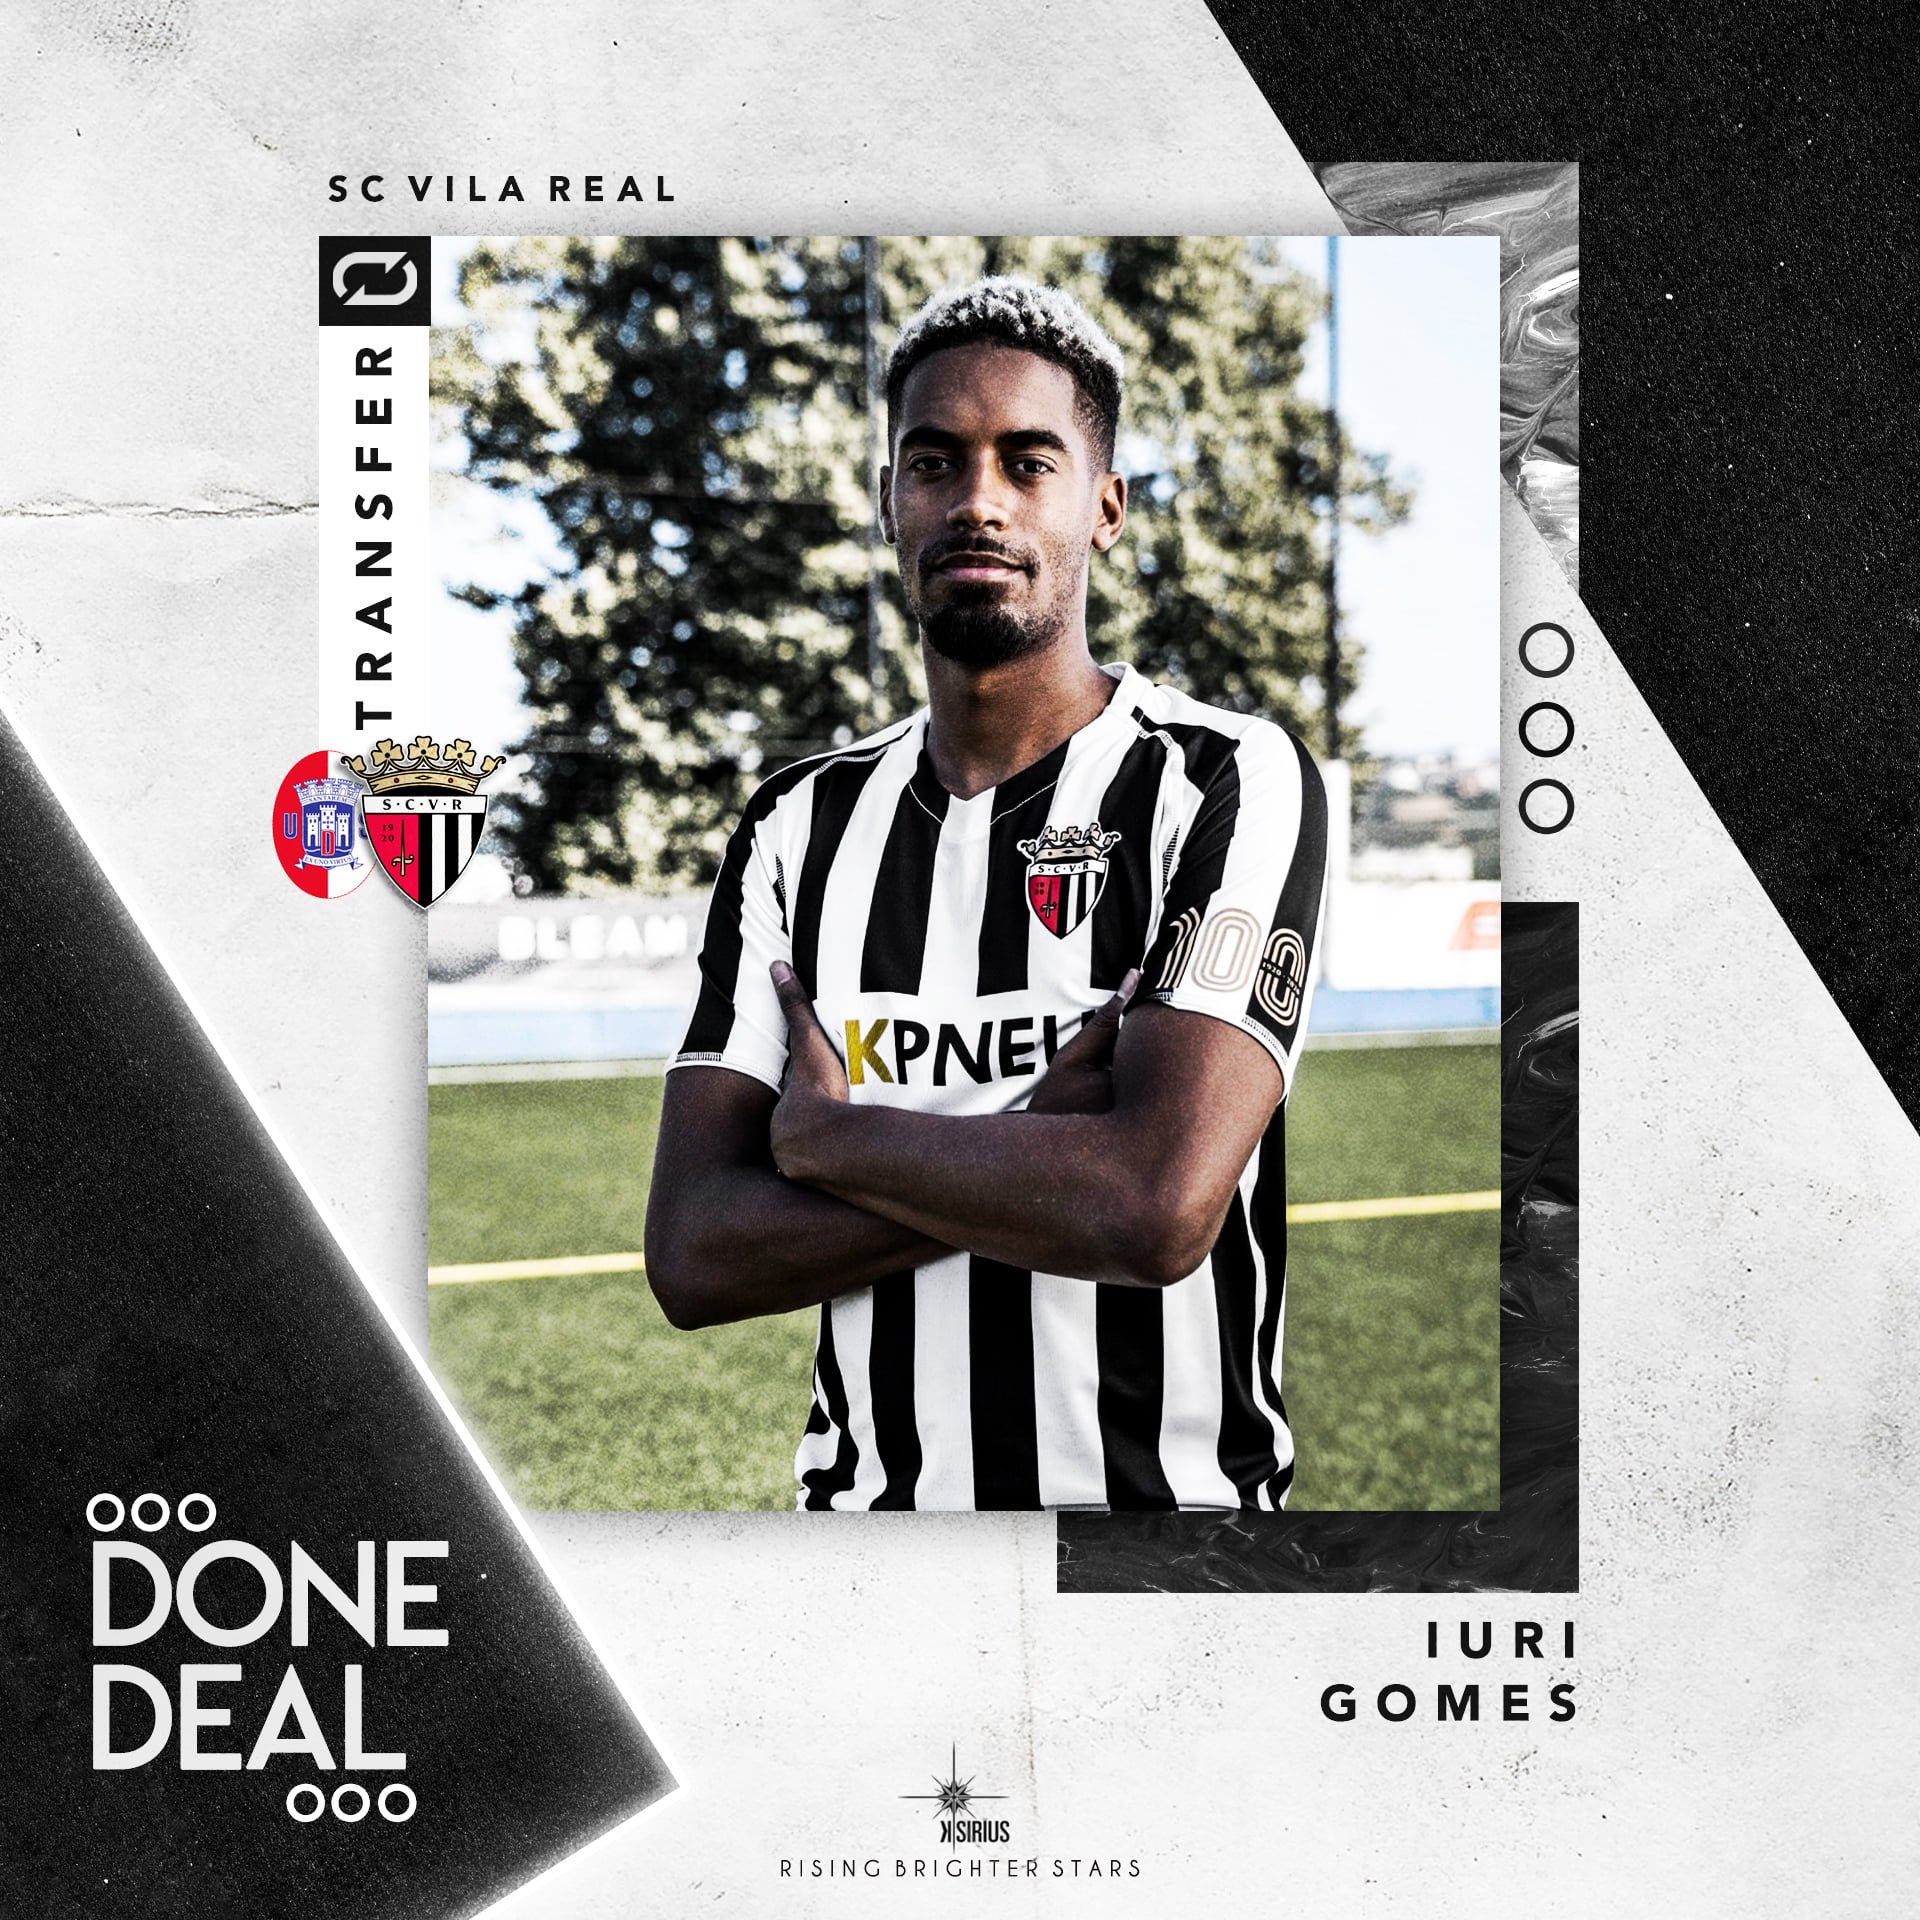 Signing: Iuri Gomes with S.C. Vila Real